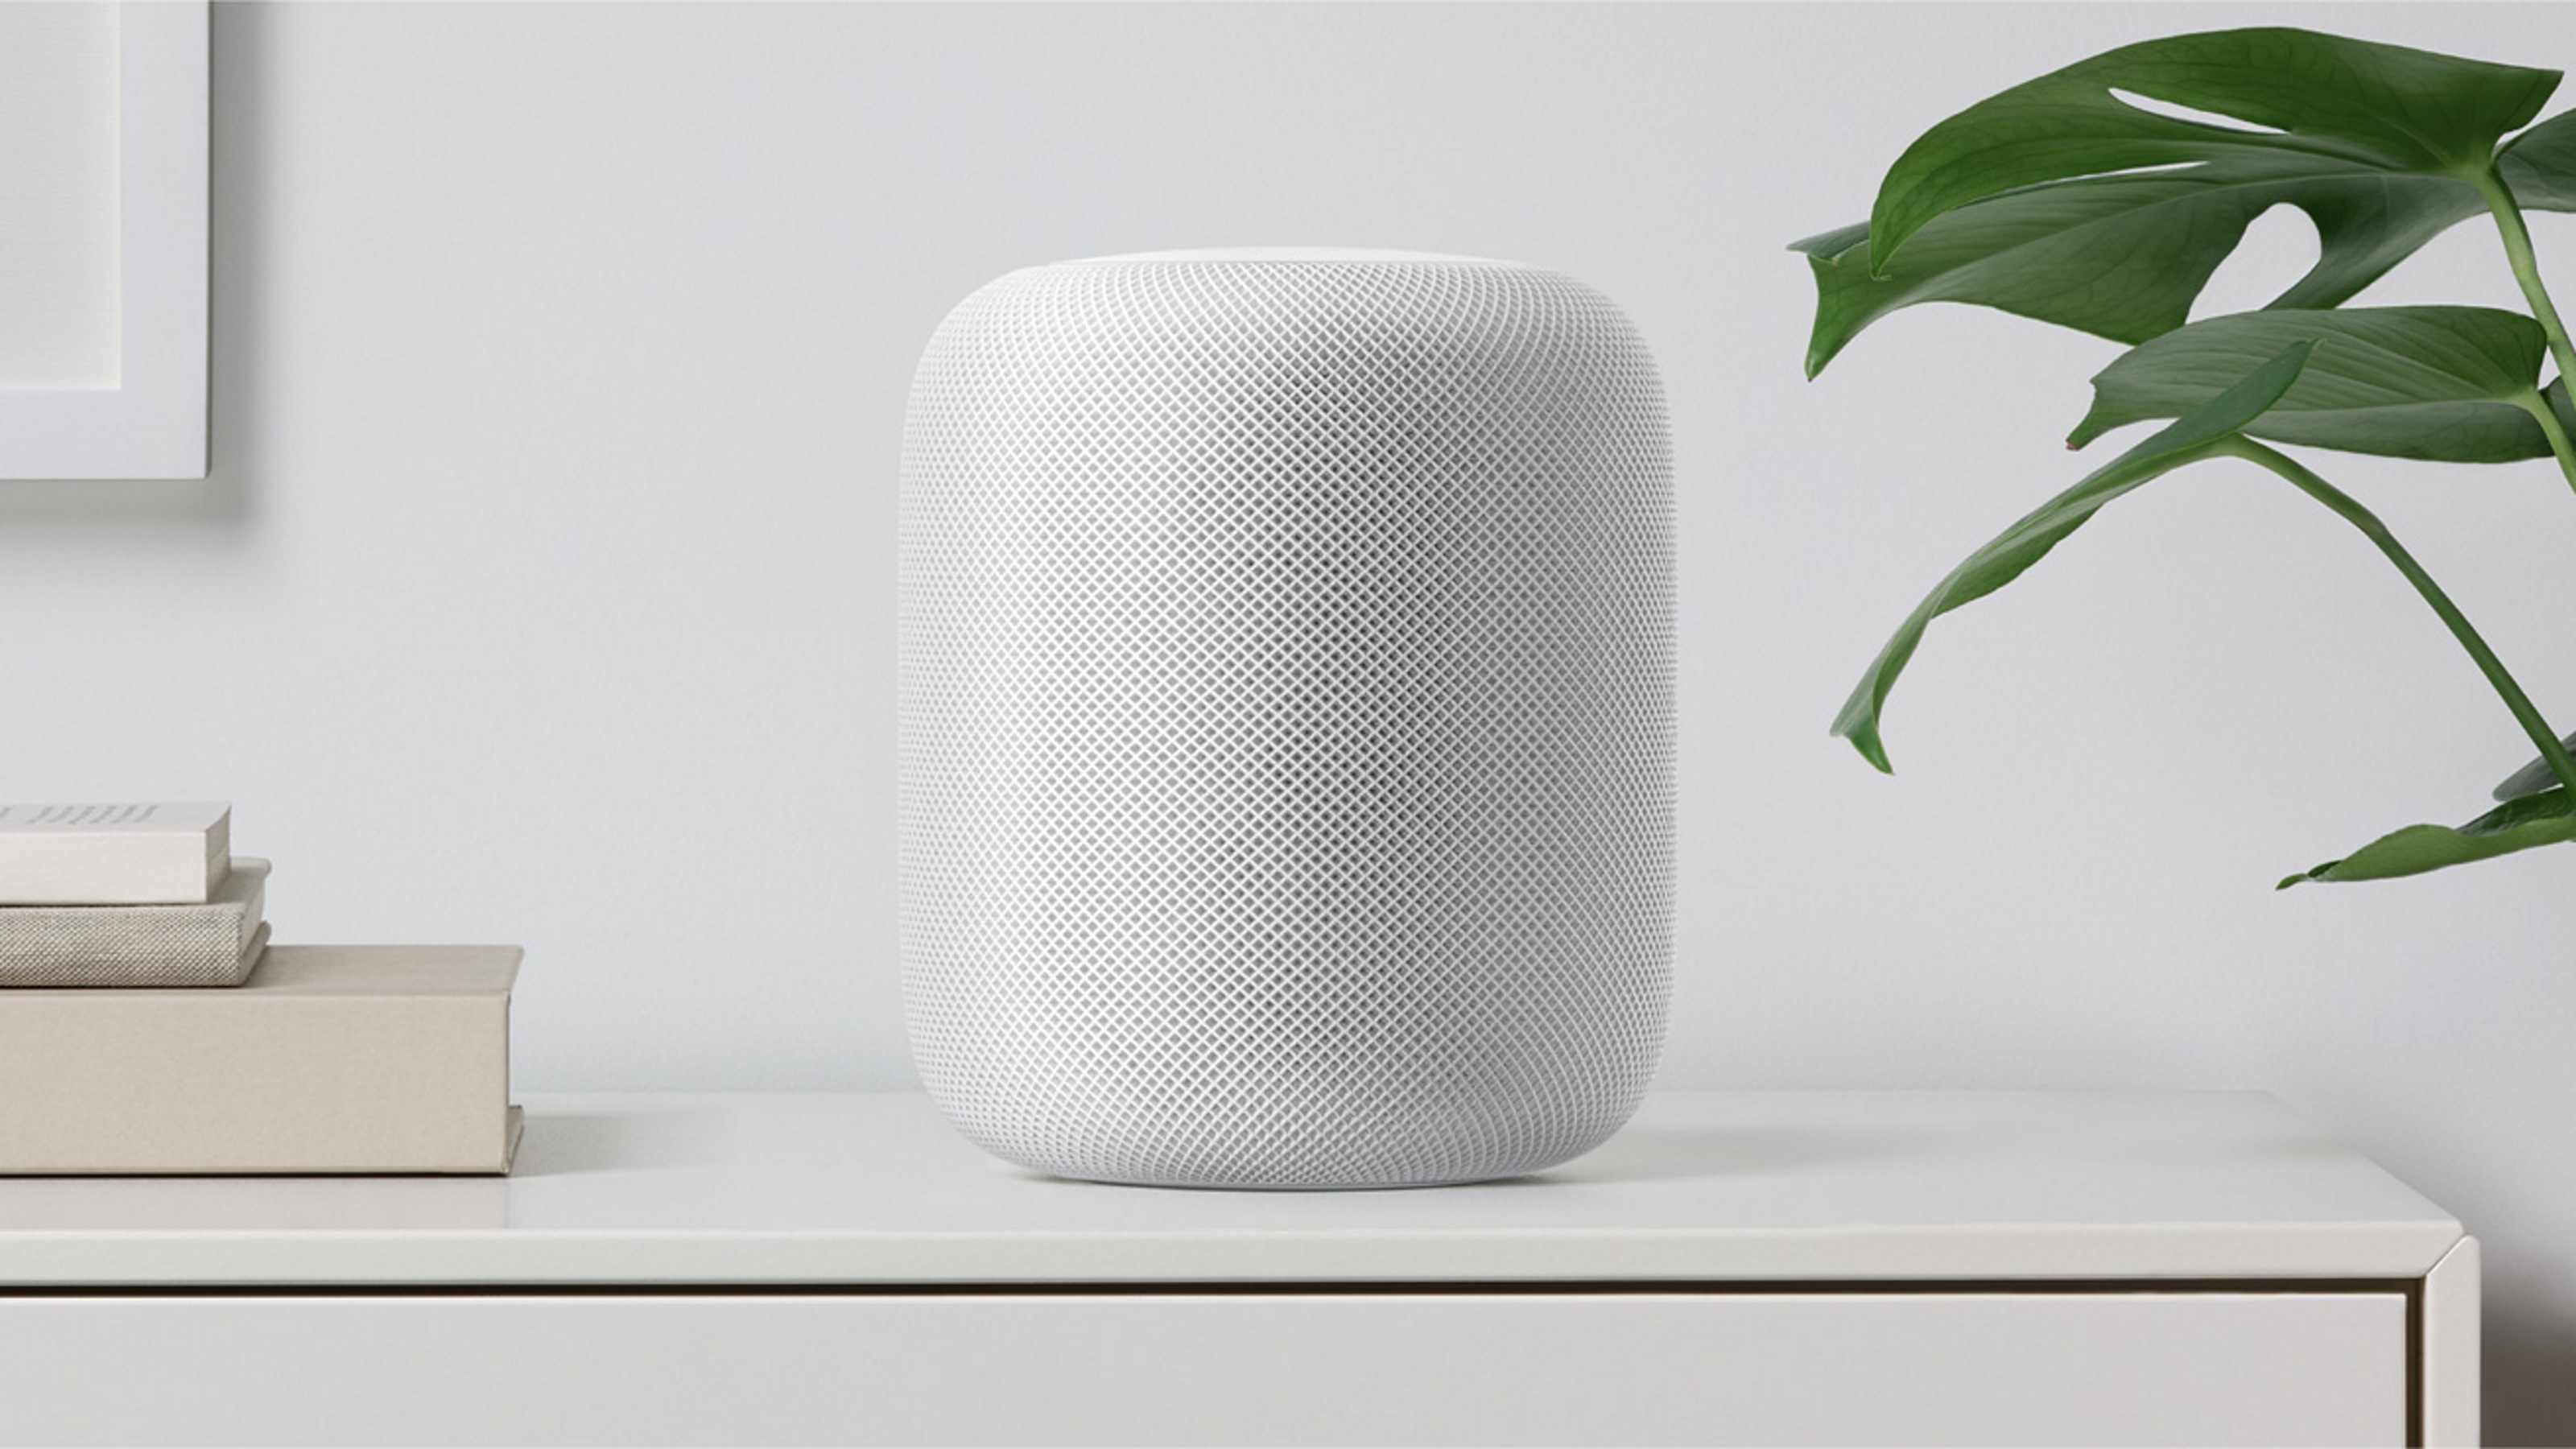 How to turn your HomePod or HomePod mini into a TV speaker | Livingetc